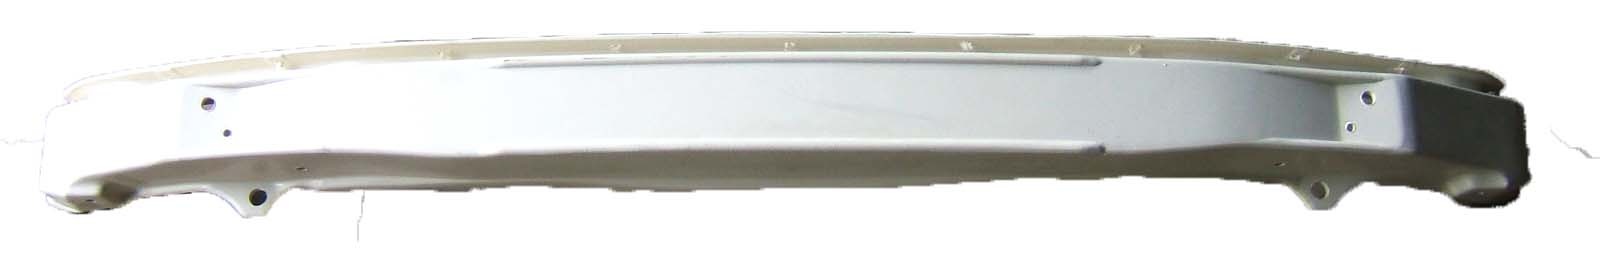 ACCORD 90-93 Front RE-BAR =07840-1